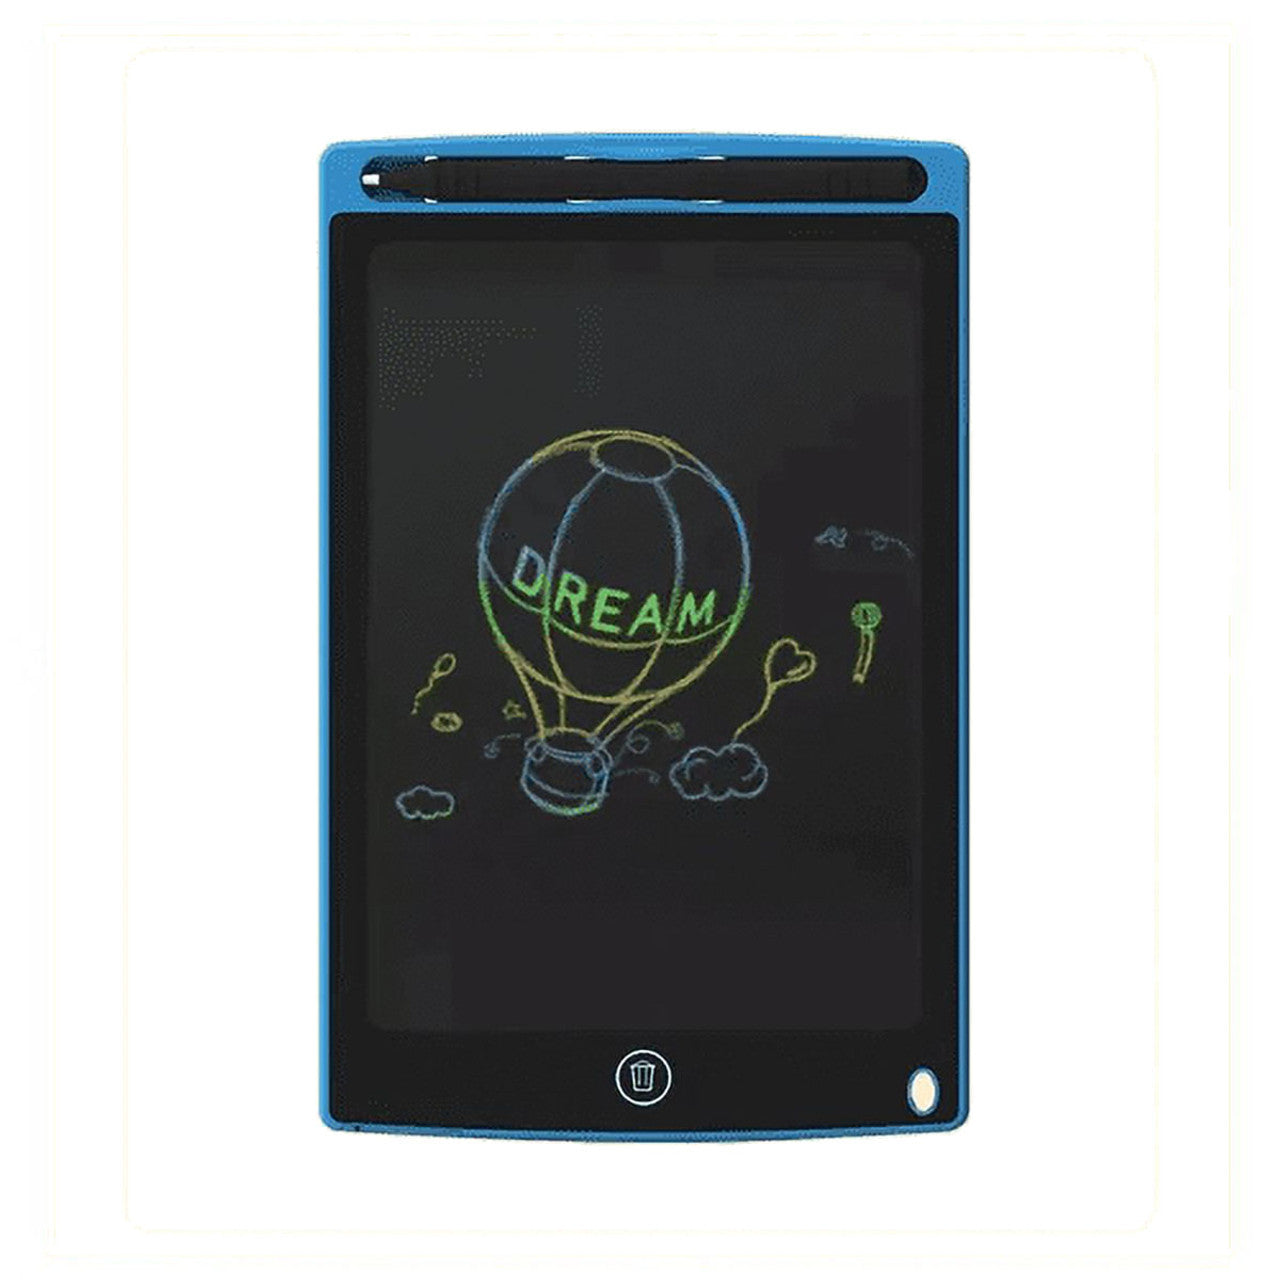 10.5" LED Writing Tablet